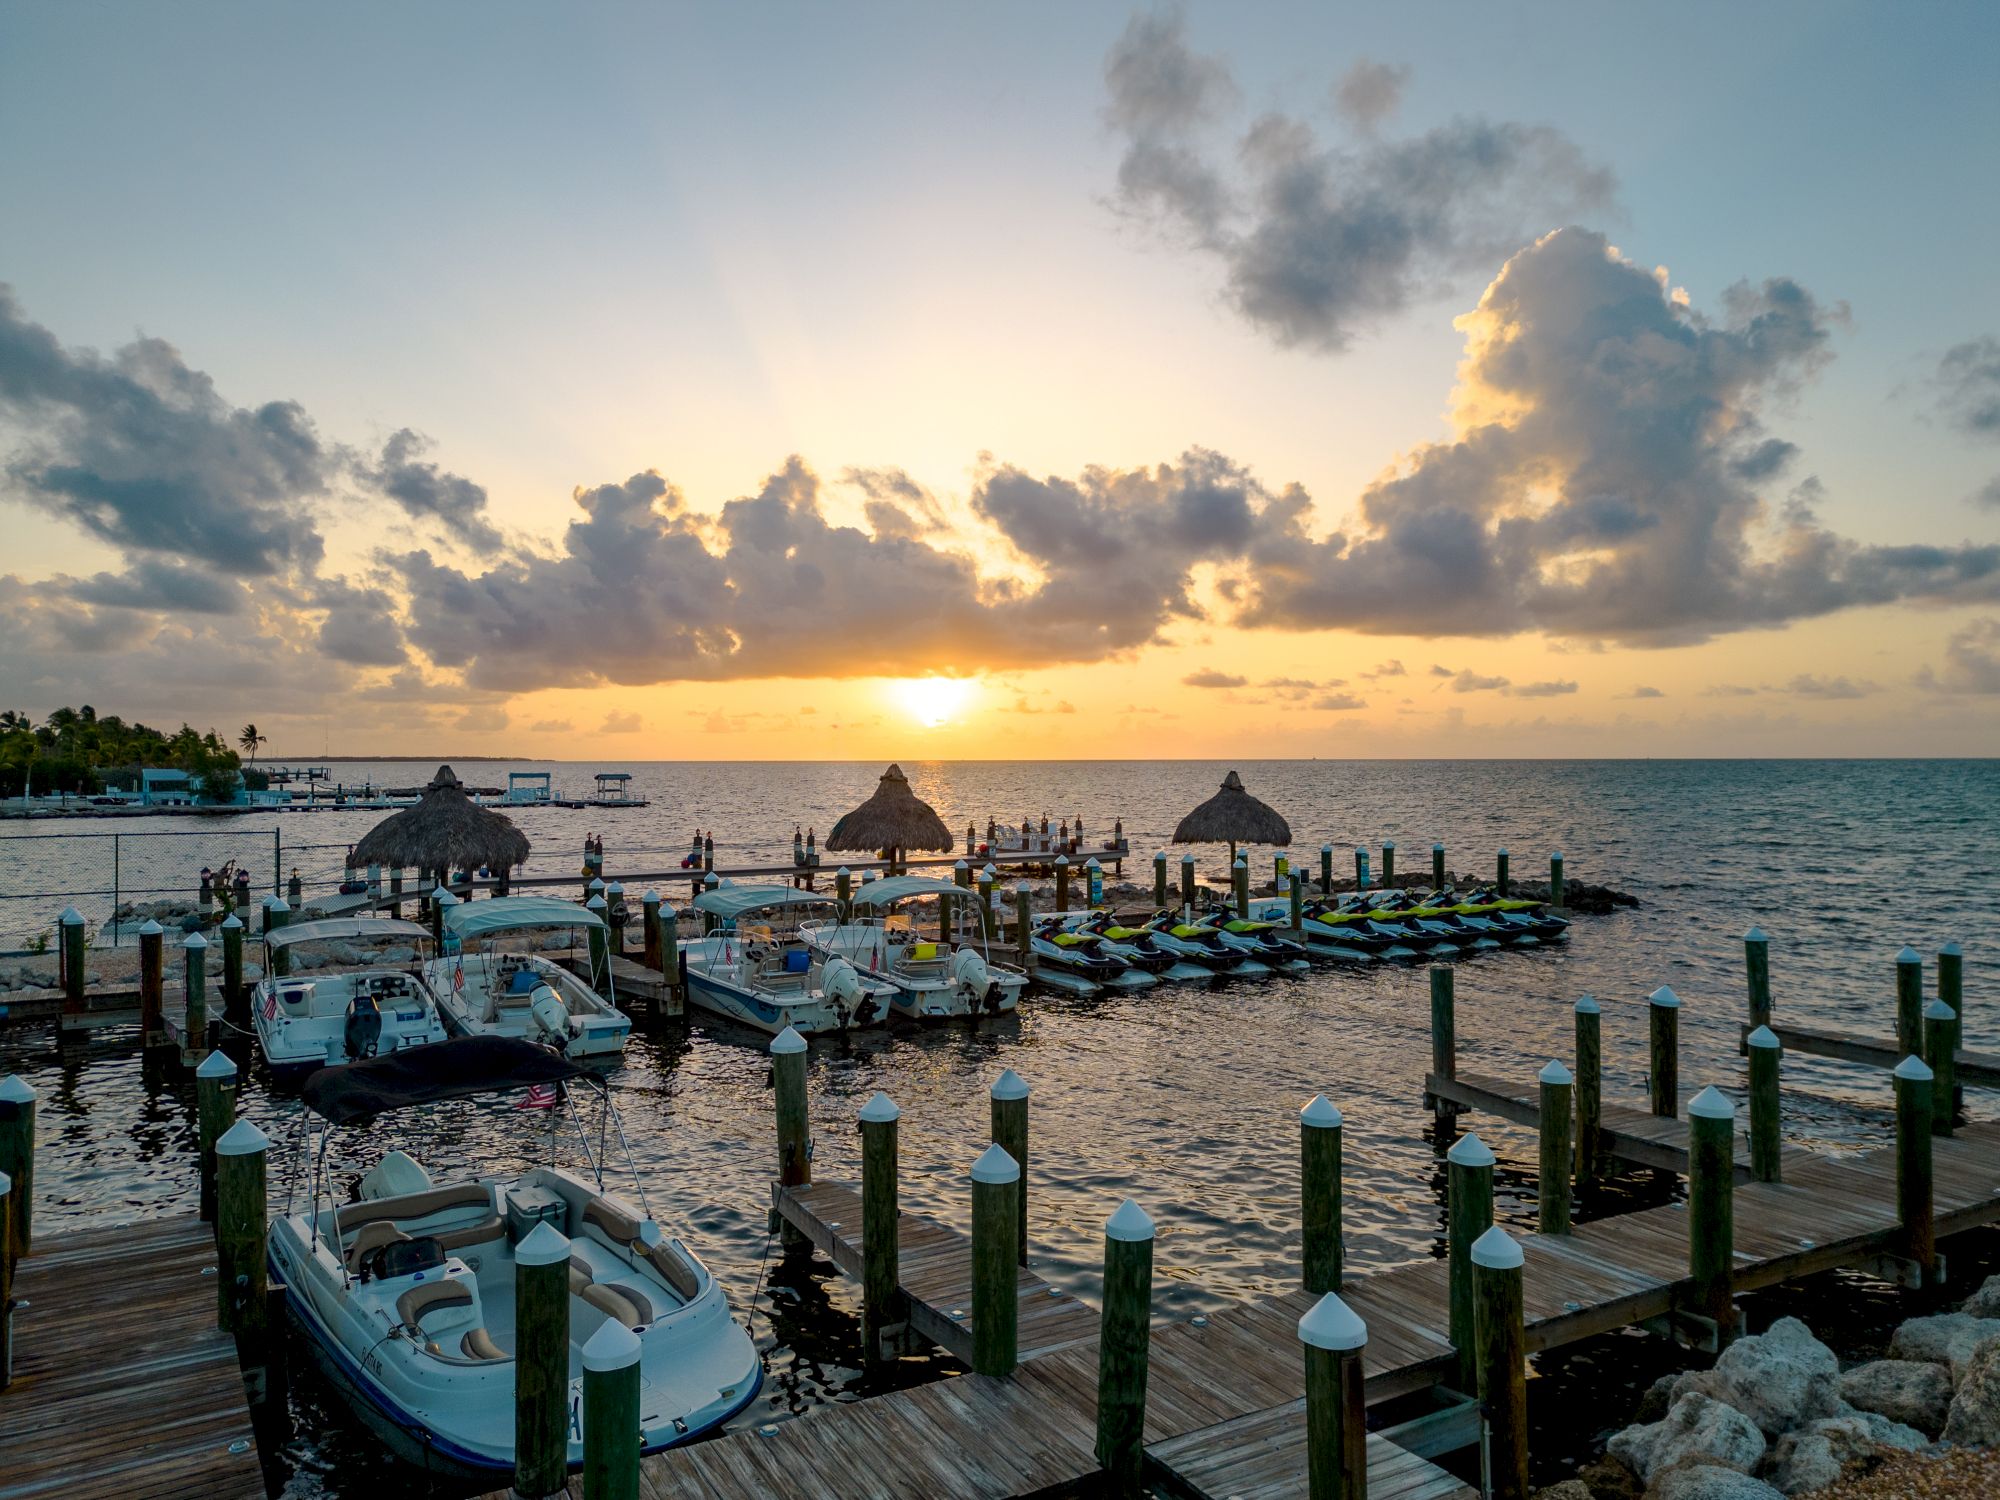 The image shows a serene marina at sunset with boats docked along piers and thatched-roof structures over the water.